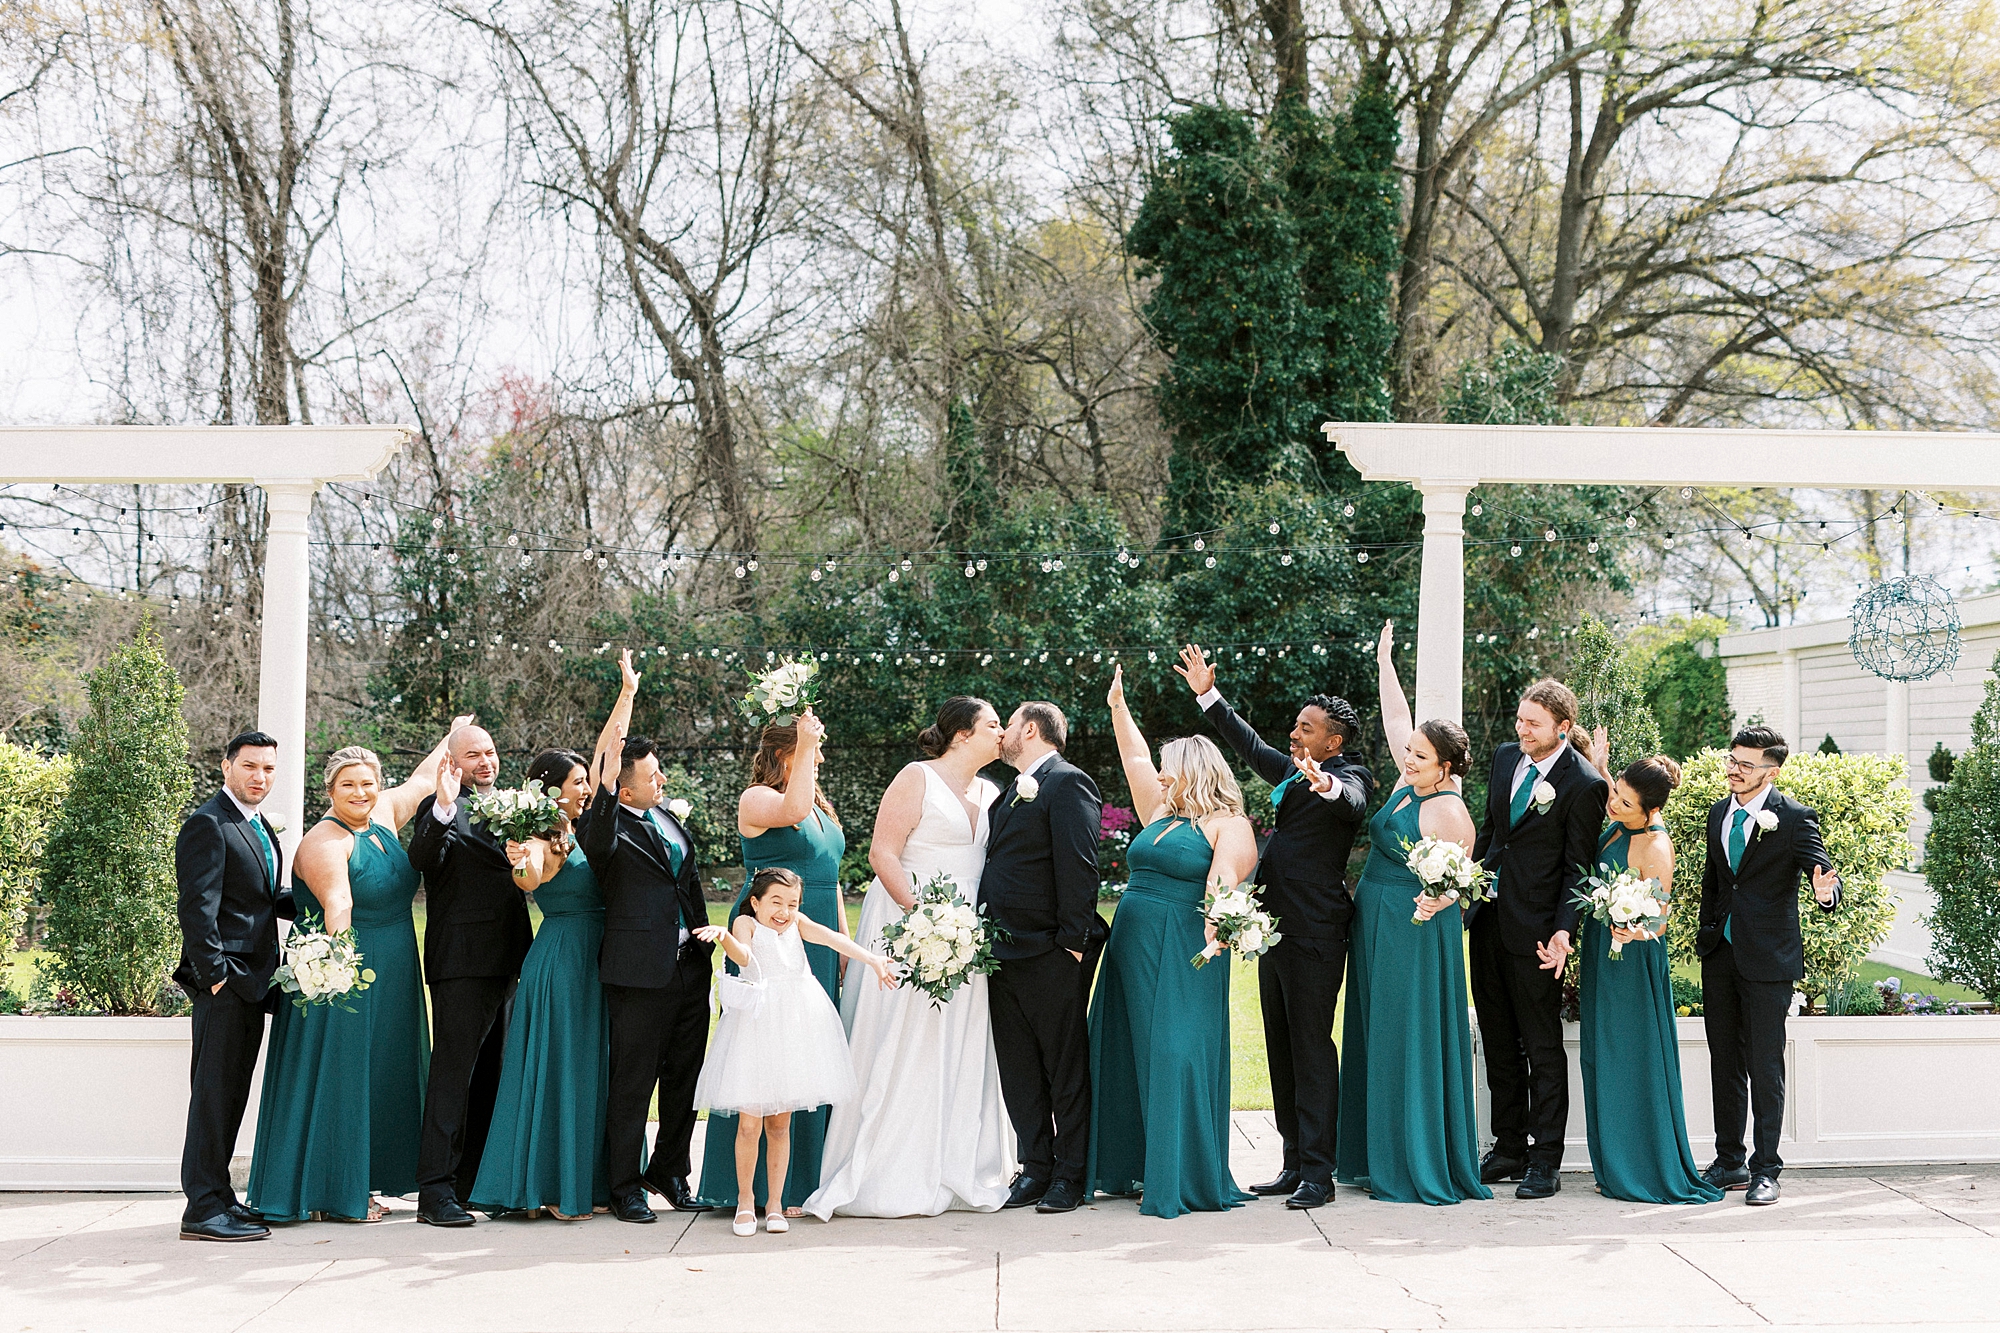 spring wedding day at Separk Mansion with wedding party in green and black